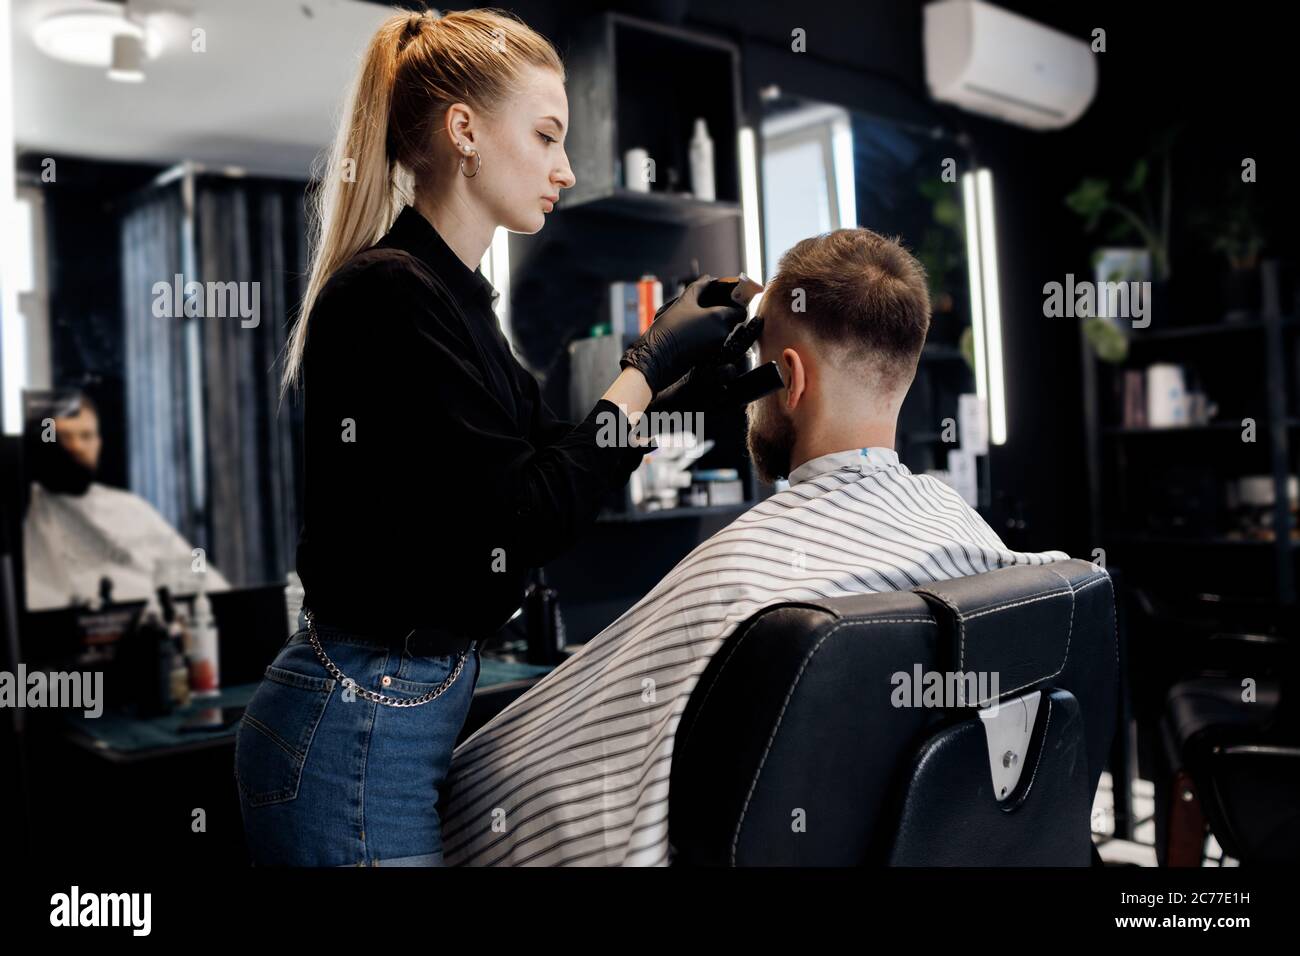 Portrait of a man in Barbershop, shave and cut by barber girl Stock Photo